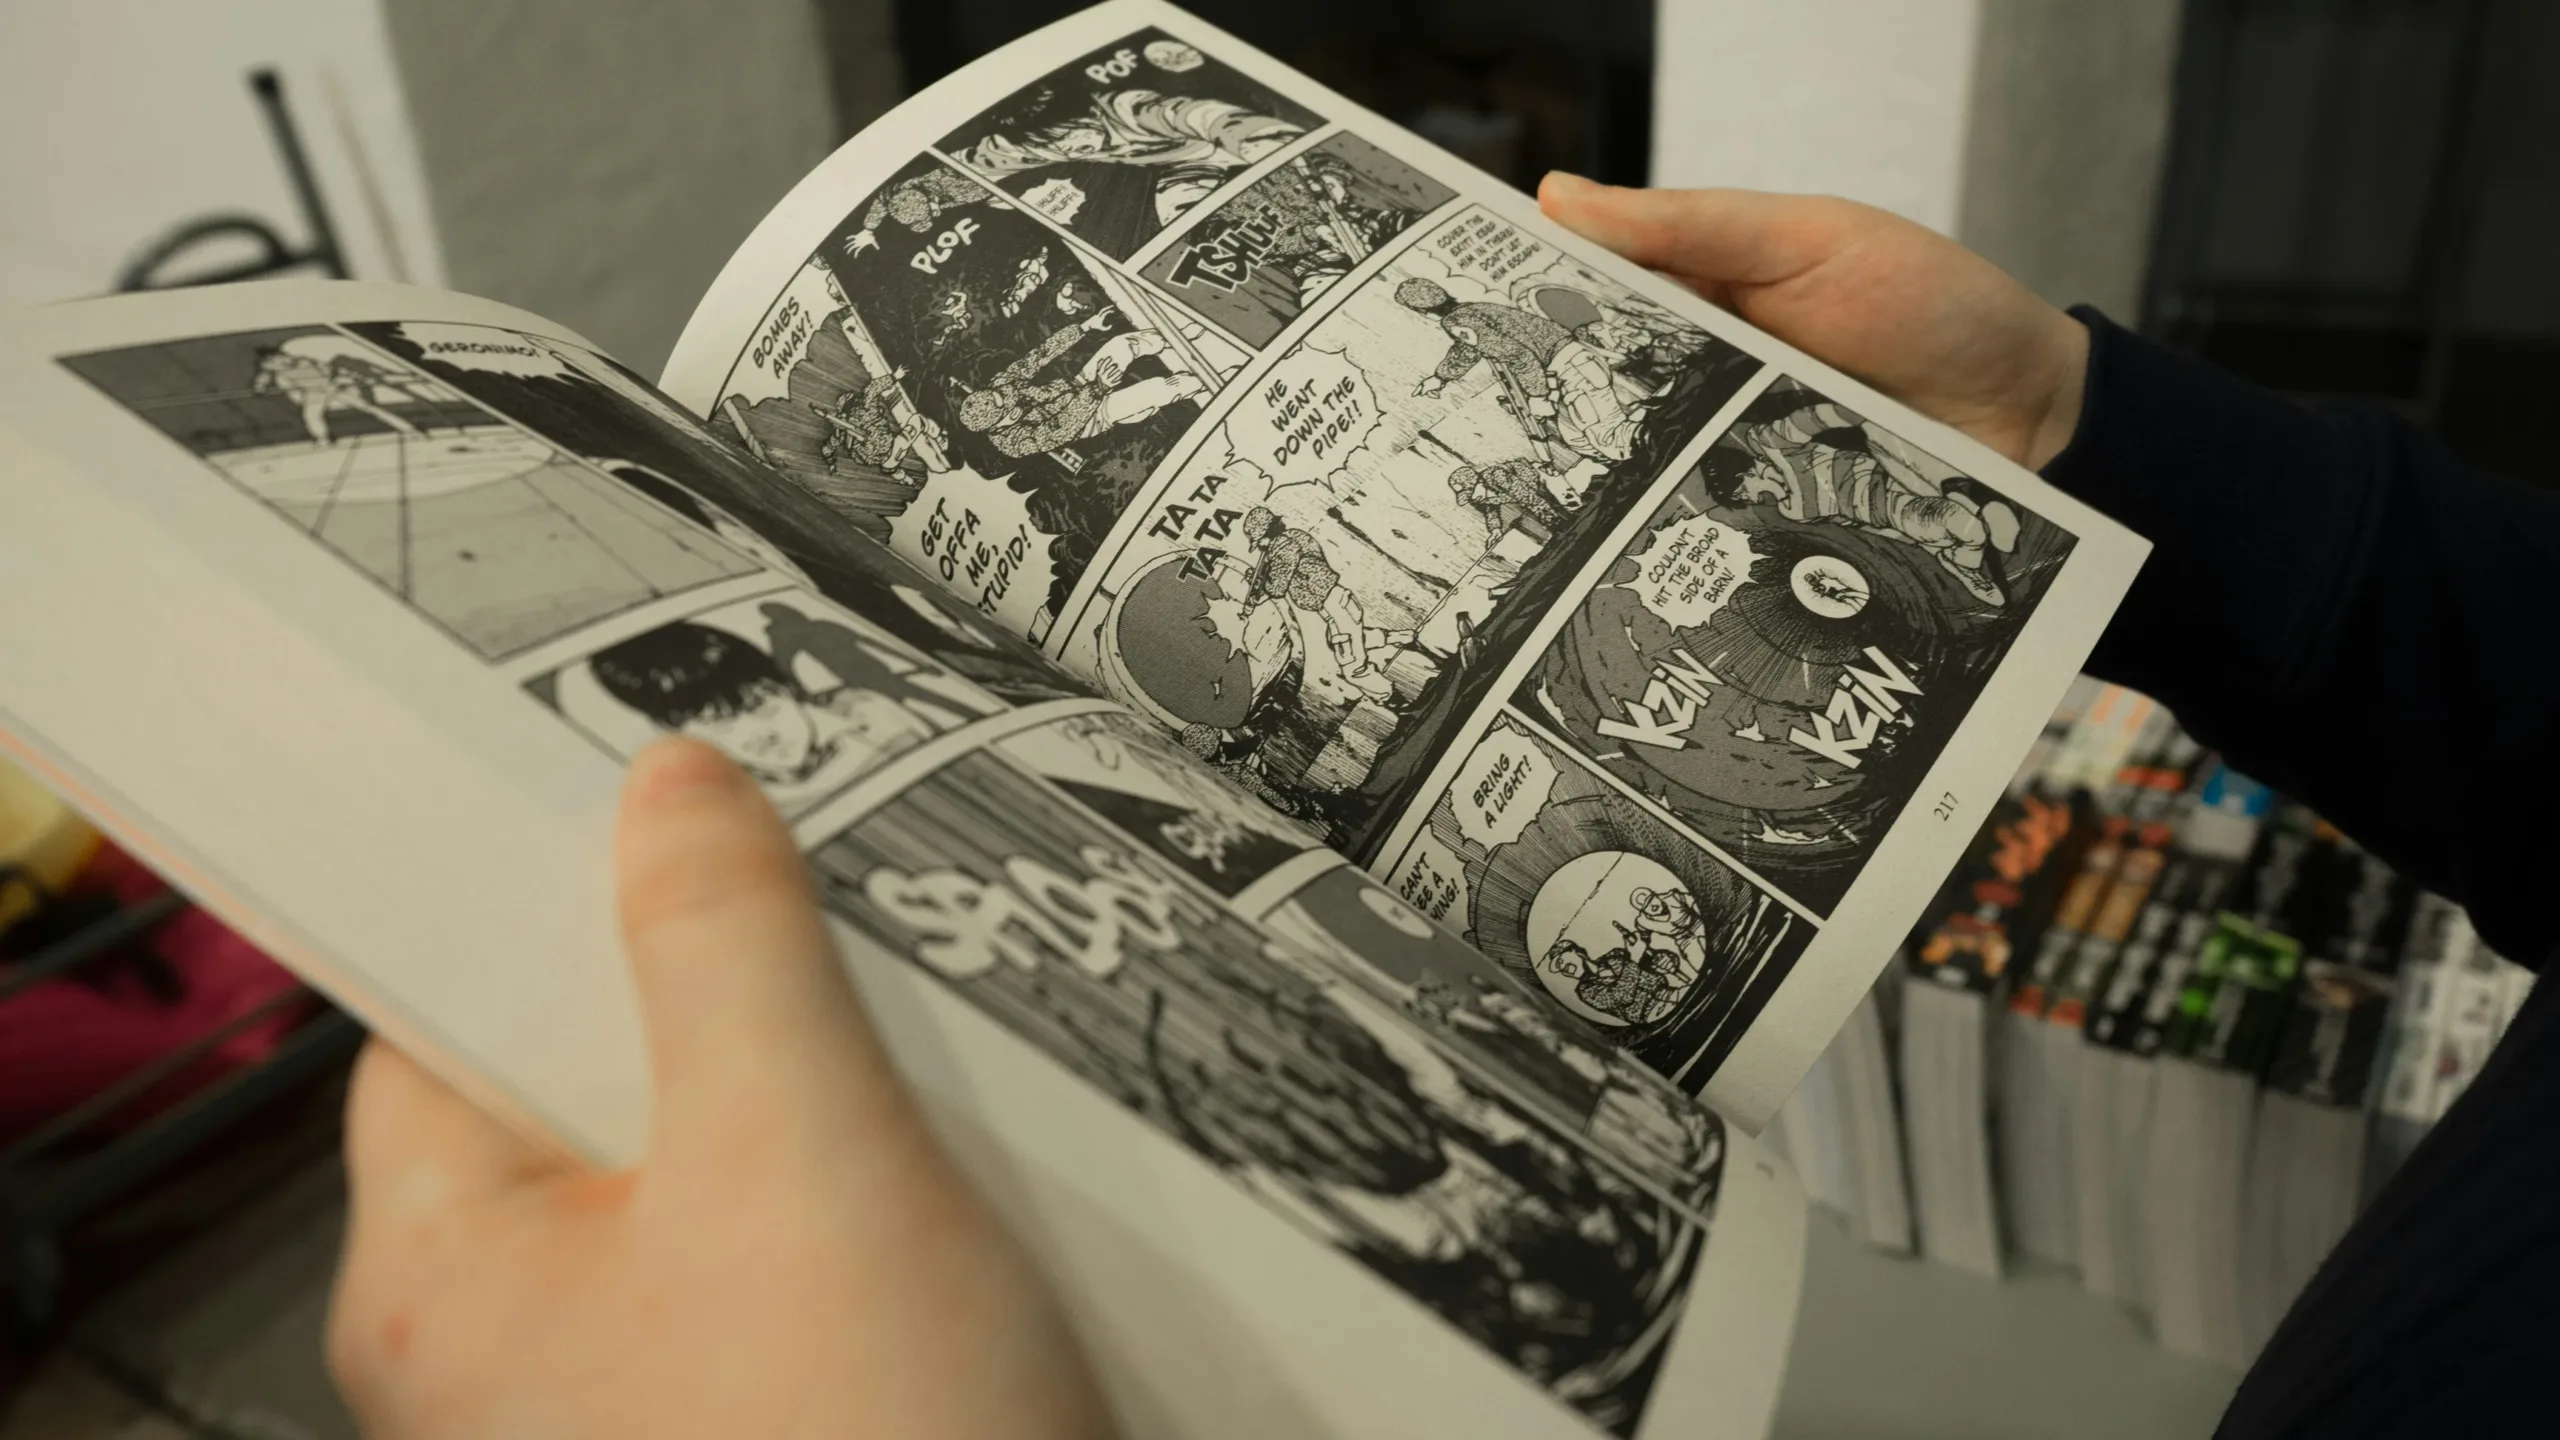 person holding an opened graphic novel book